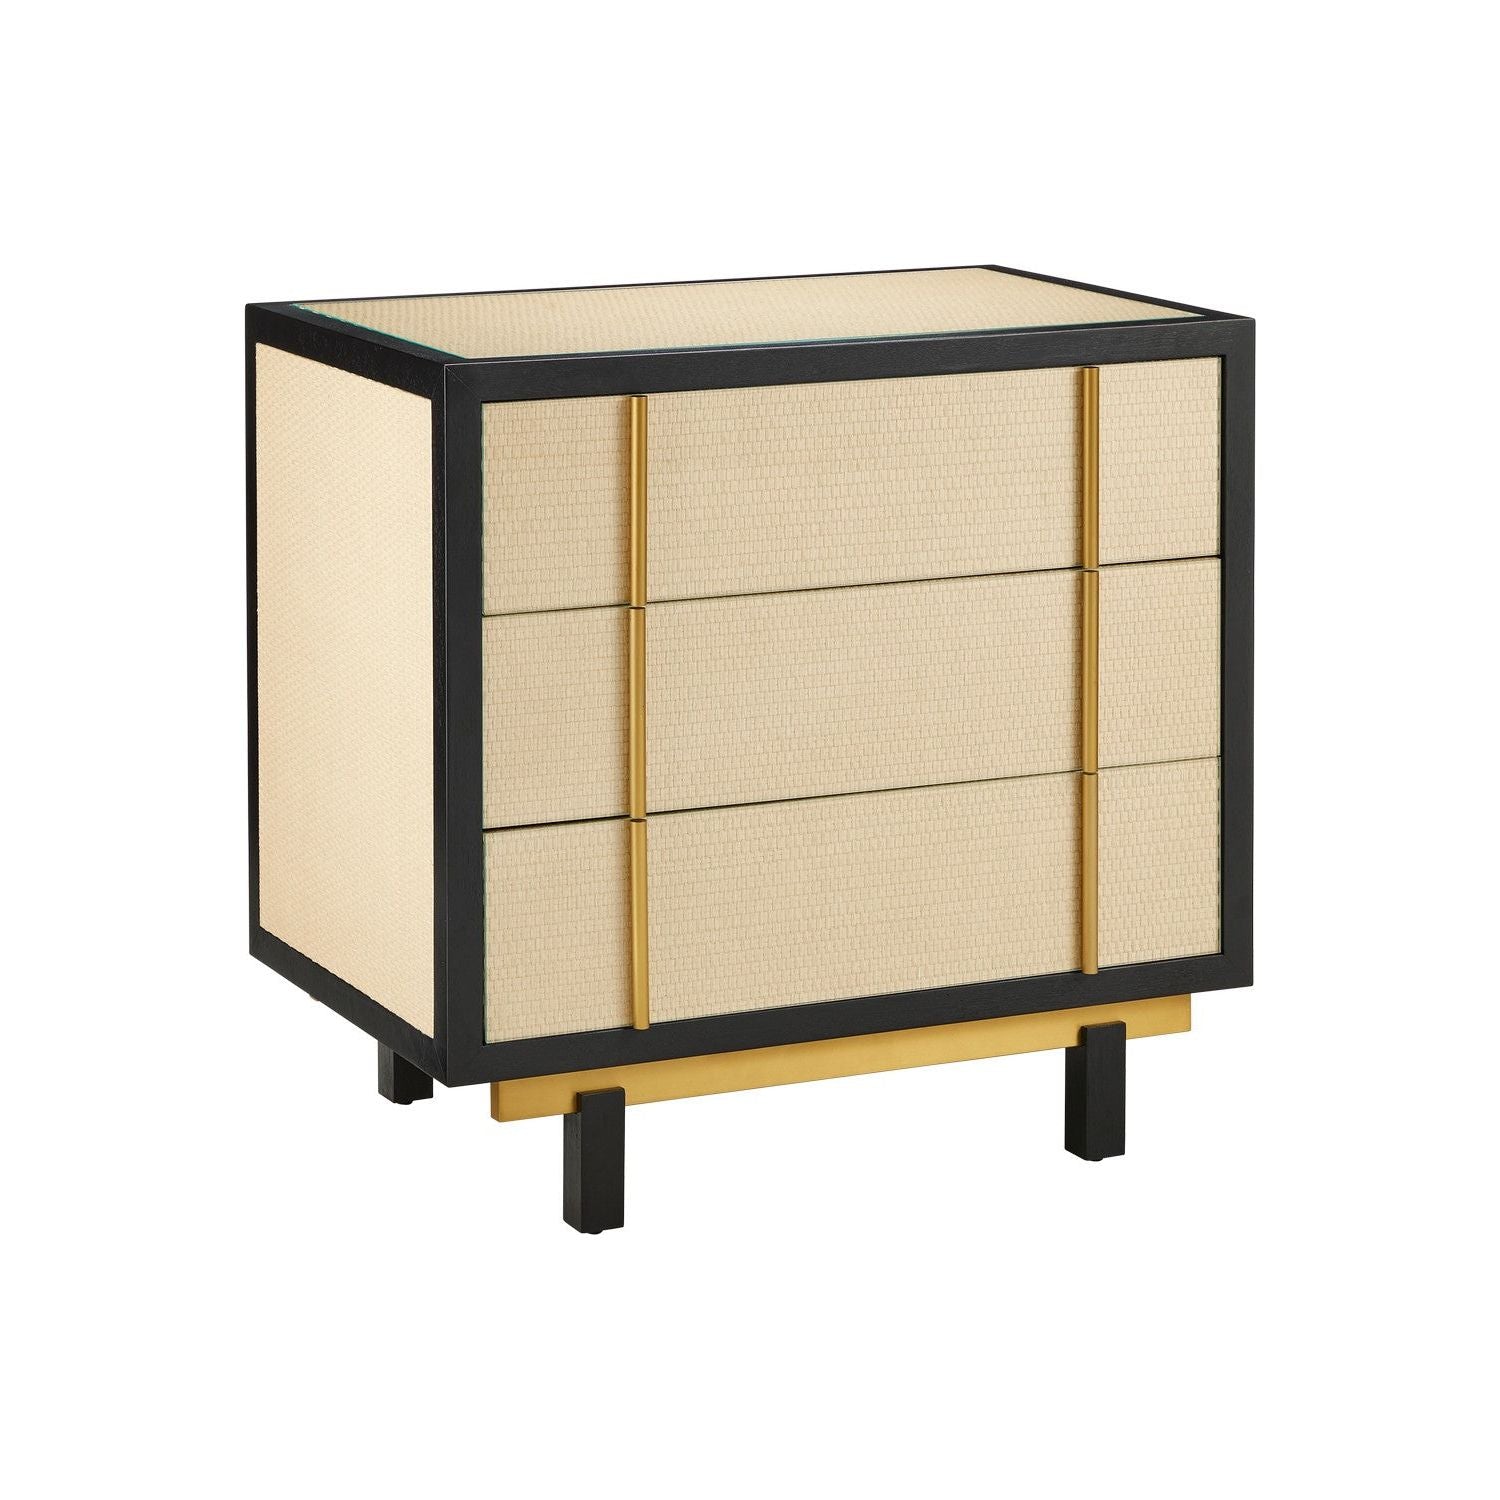 Currey and Company - 3000-0301 - Nightstand - Ivory/Black/Brushed Brass/Natural/Dusty Blue/Clear